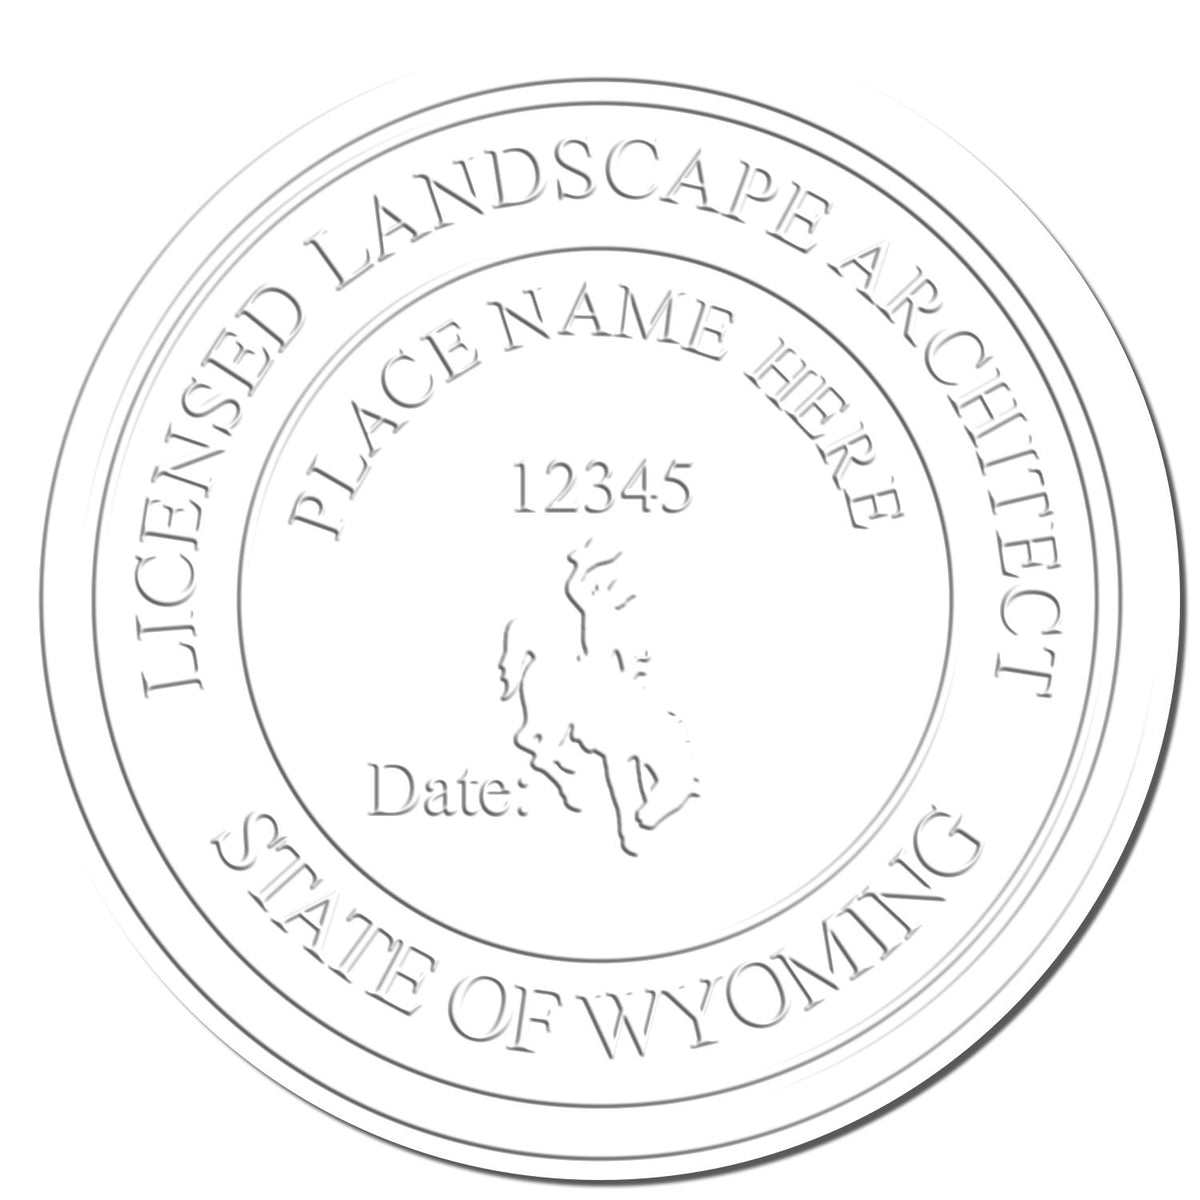 This paper is stamped with a sample imprint of the Soft Pocket Wyoming Landscape Architect Embosser, signifying its quality and reliability.